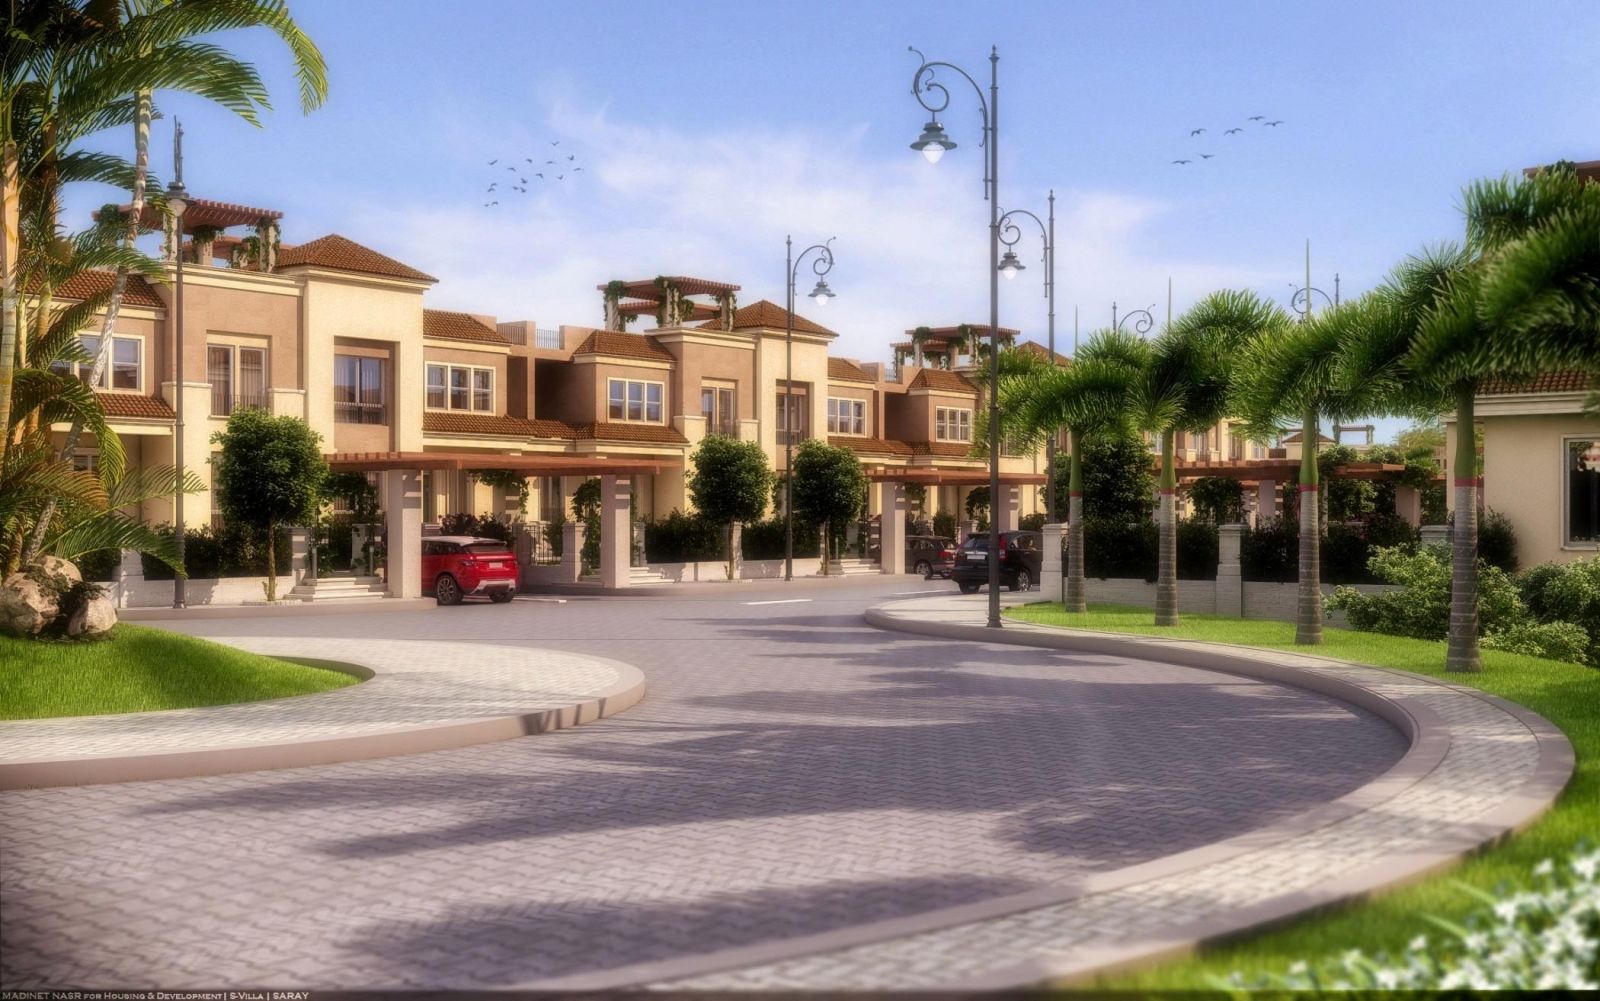 Without down payment, get an apartment of 179 m² in Sarai Compound, Fifth Settlement